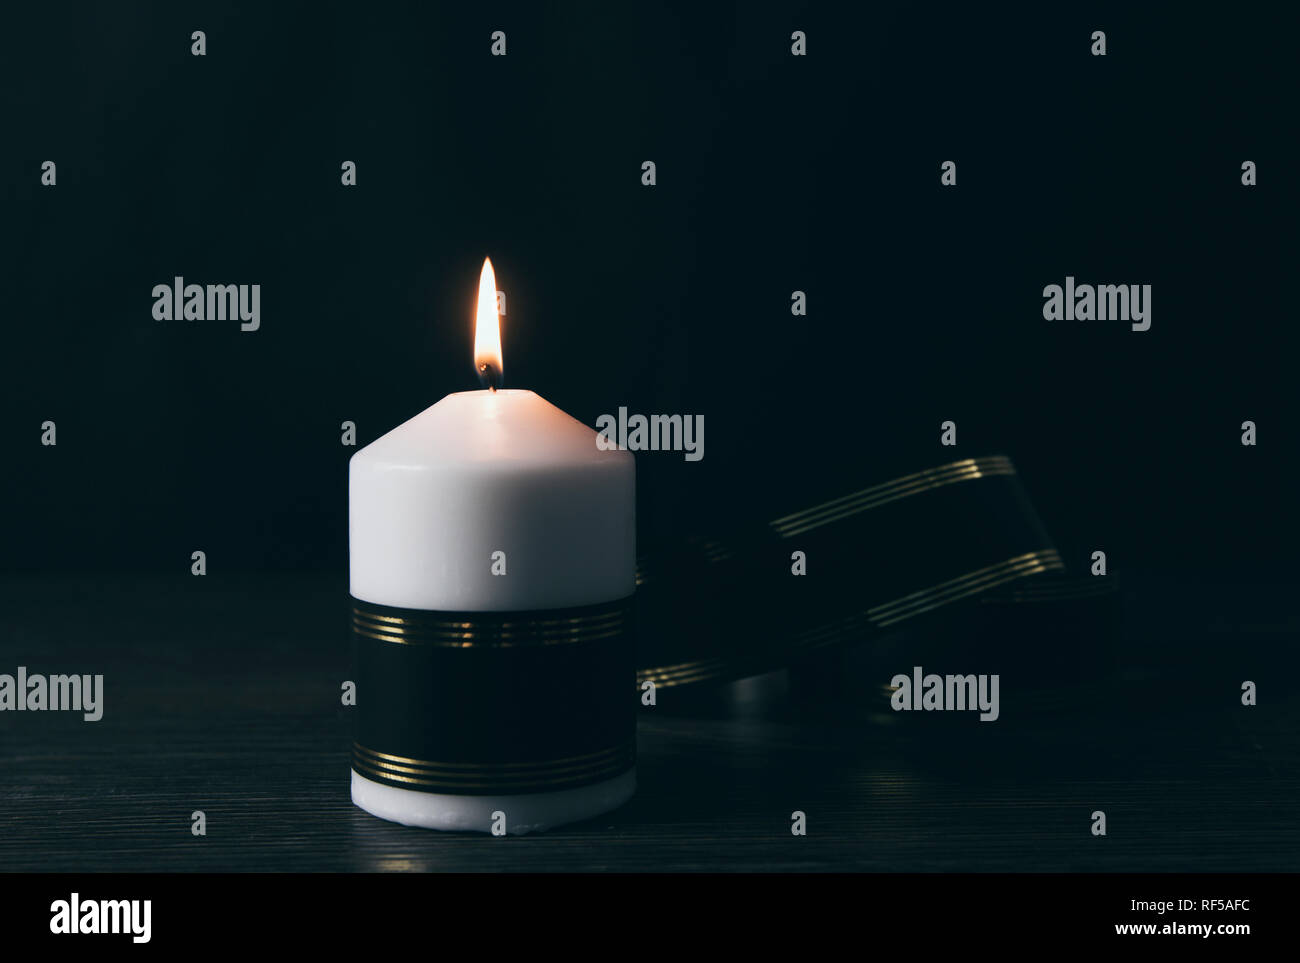 White candle with black ribbon, symbol of remembrance or mourning, black background. Lot of blank copy space for your text. Stock Photo